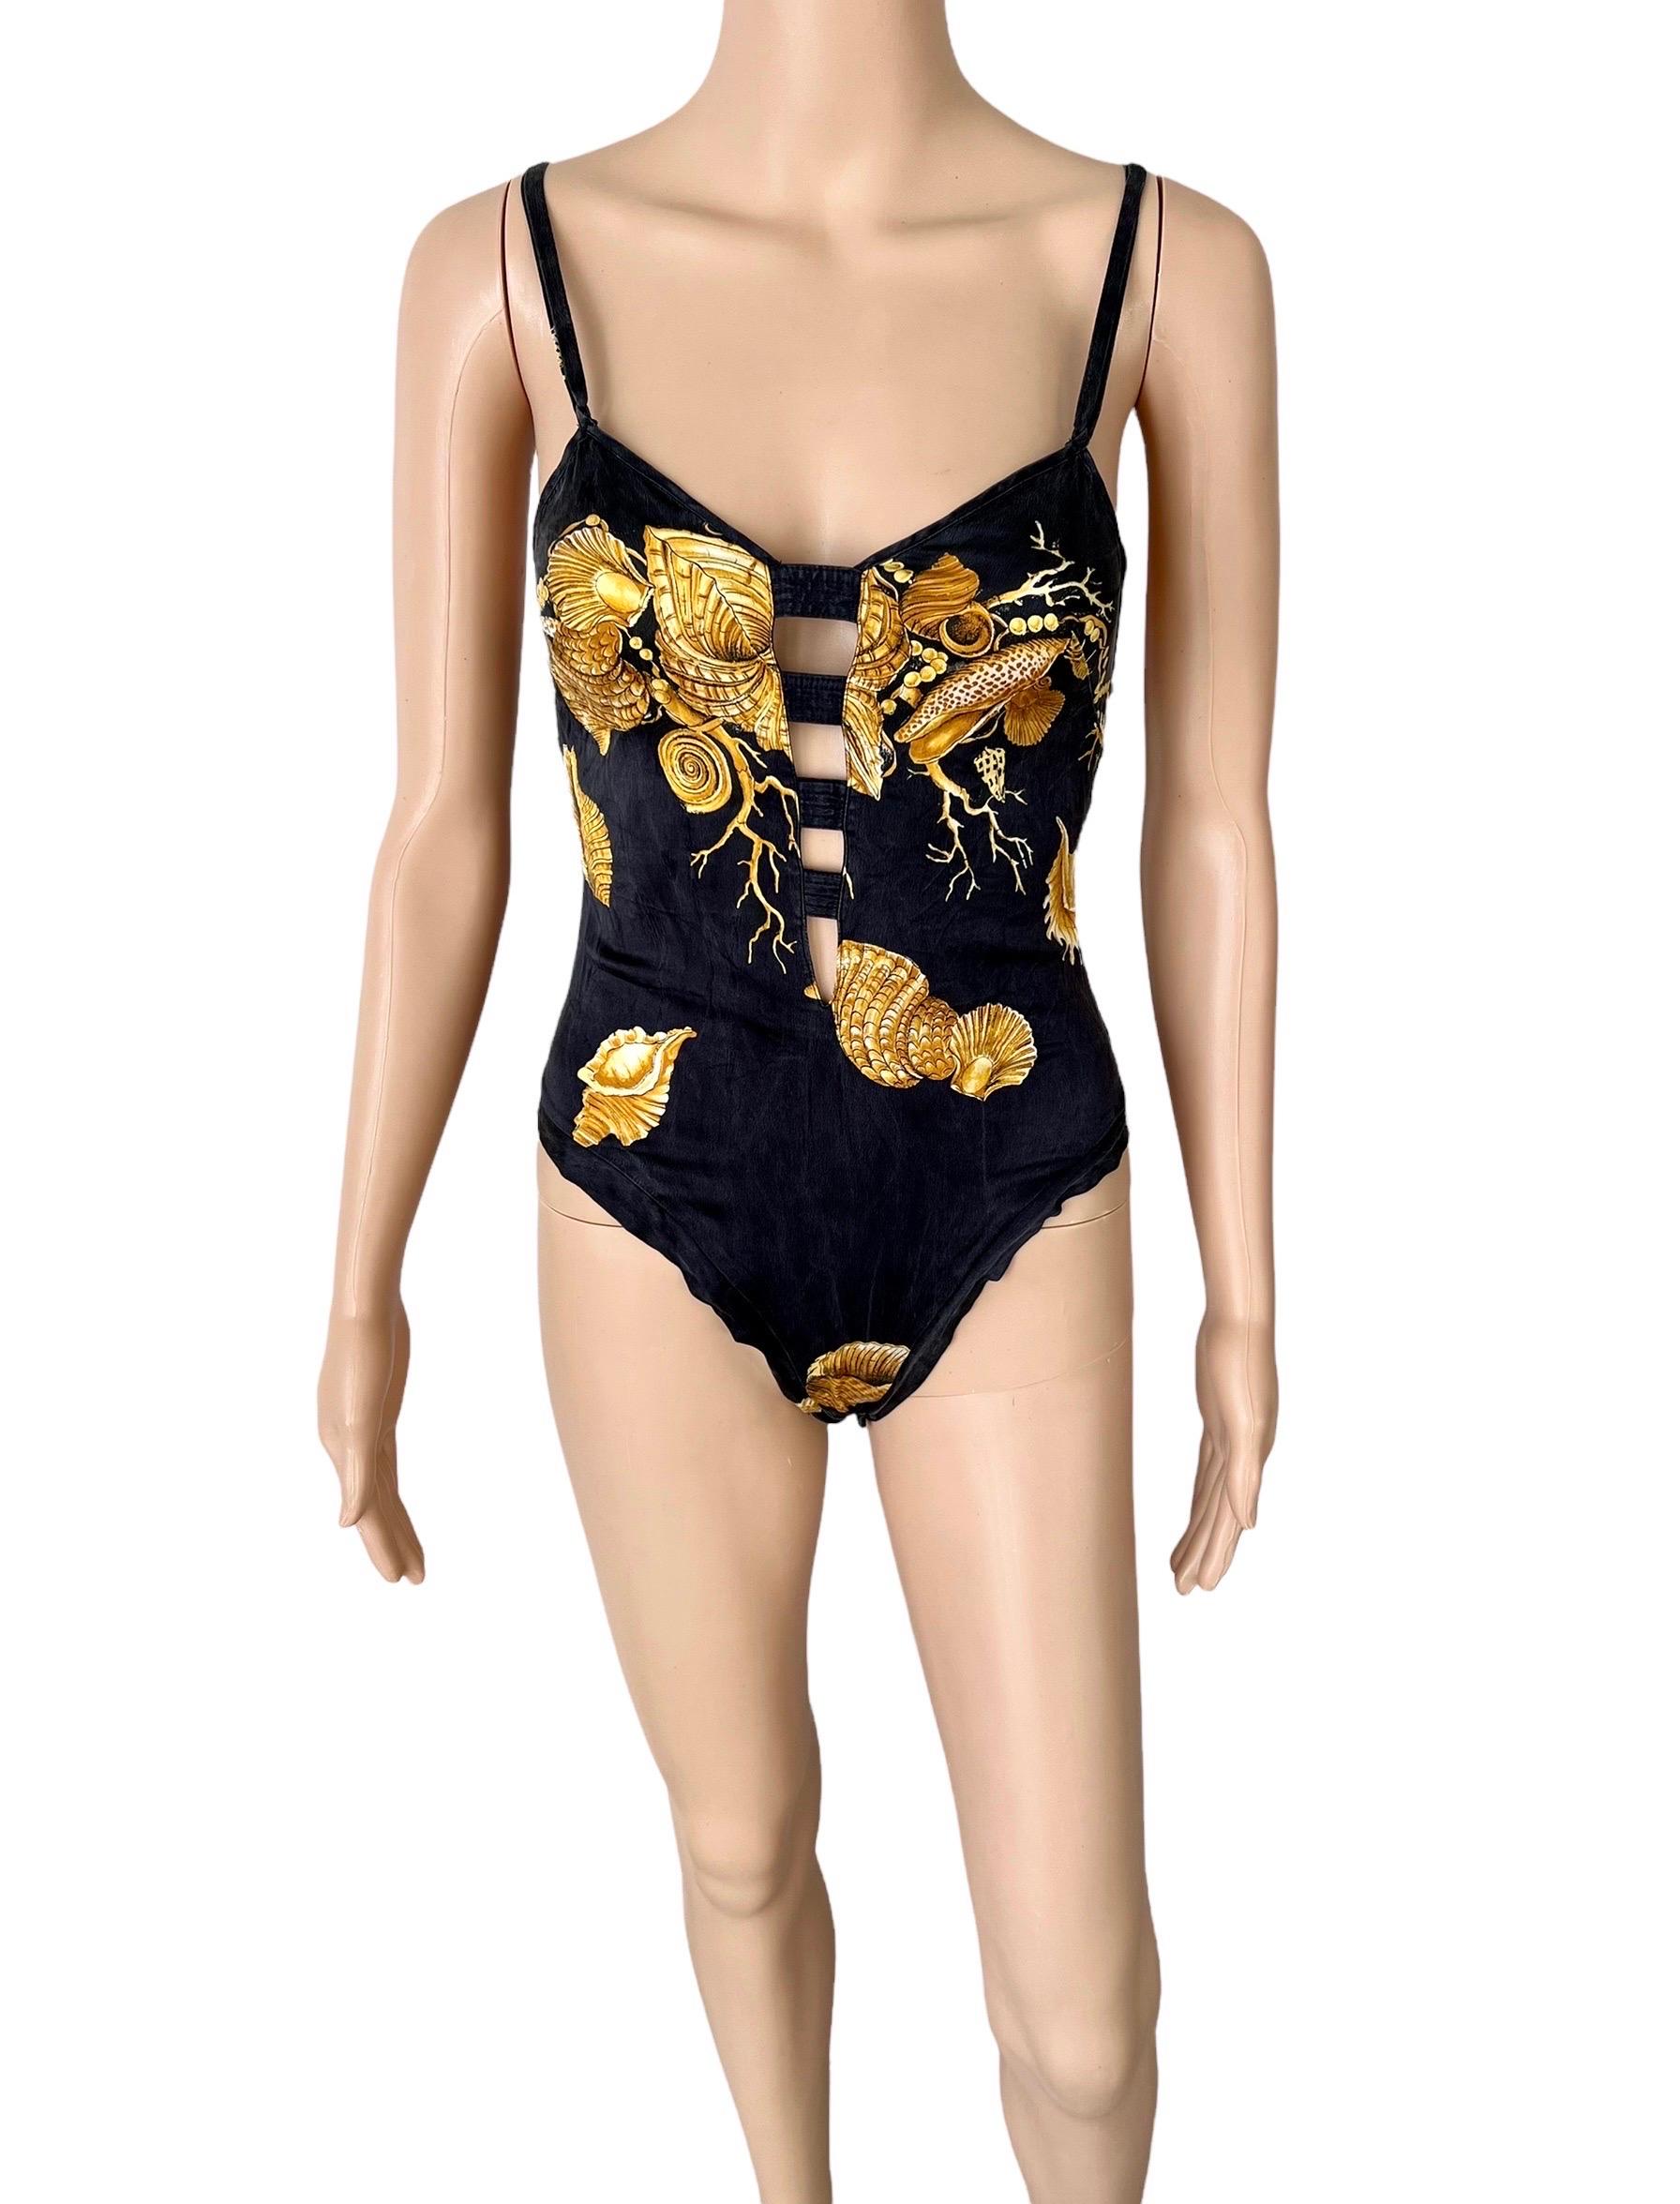 Gianni Versace S/S 1992 Vintage Plunging Baroque Print Sheer Lace Bodysuit Top  For Sale 3